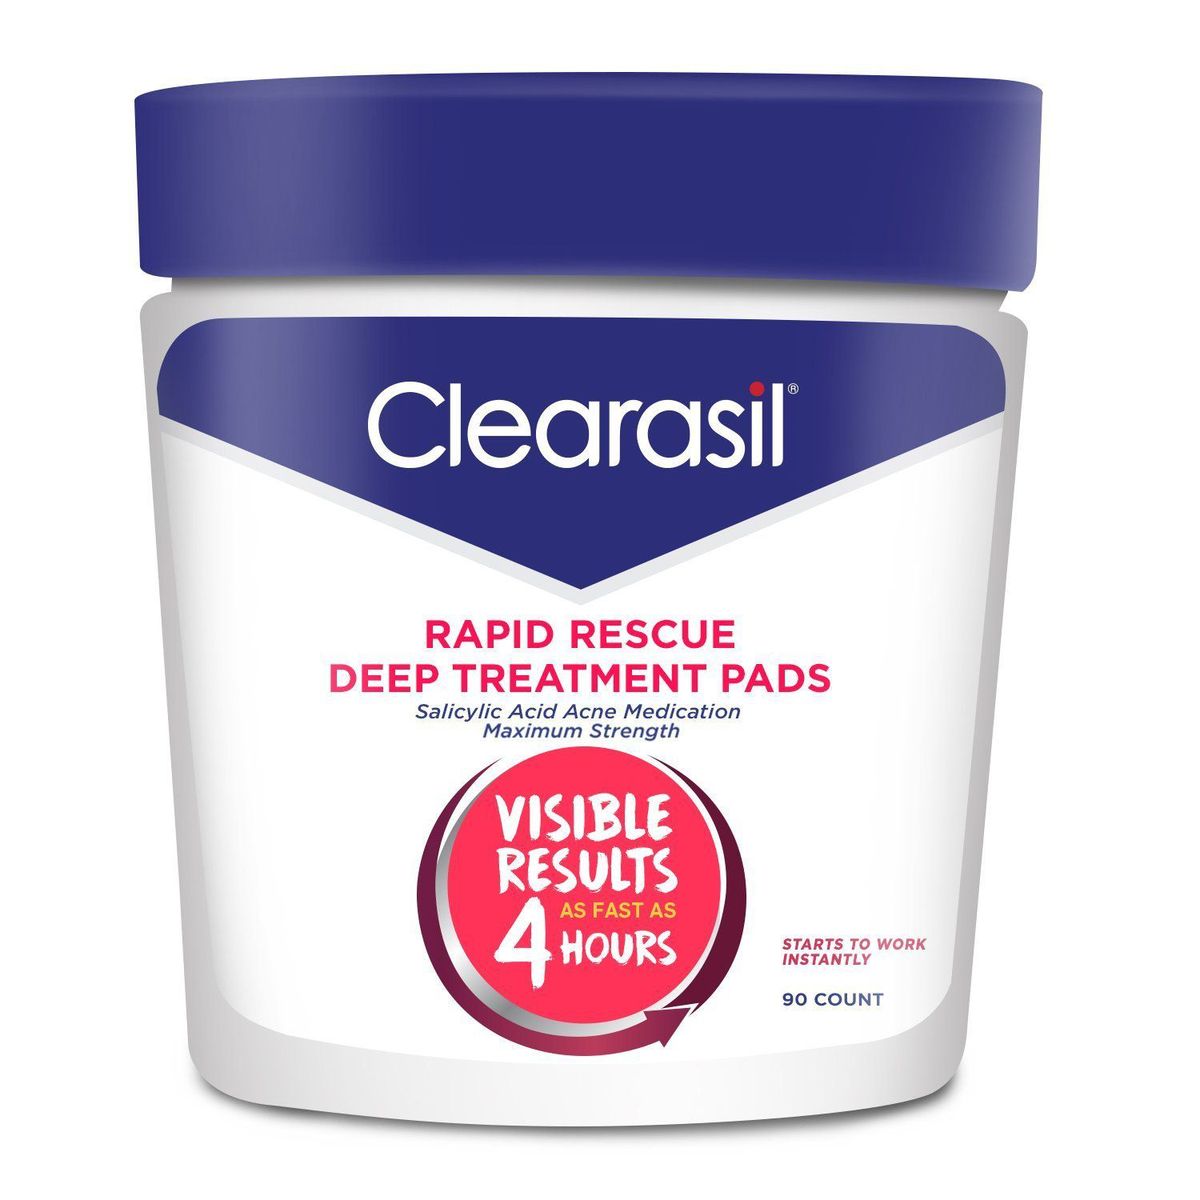 Clearasil Ultra Rapid Action Pads